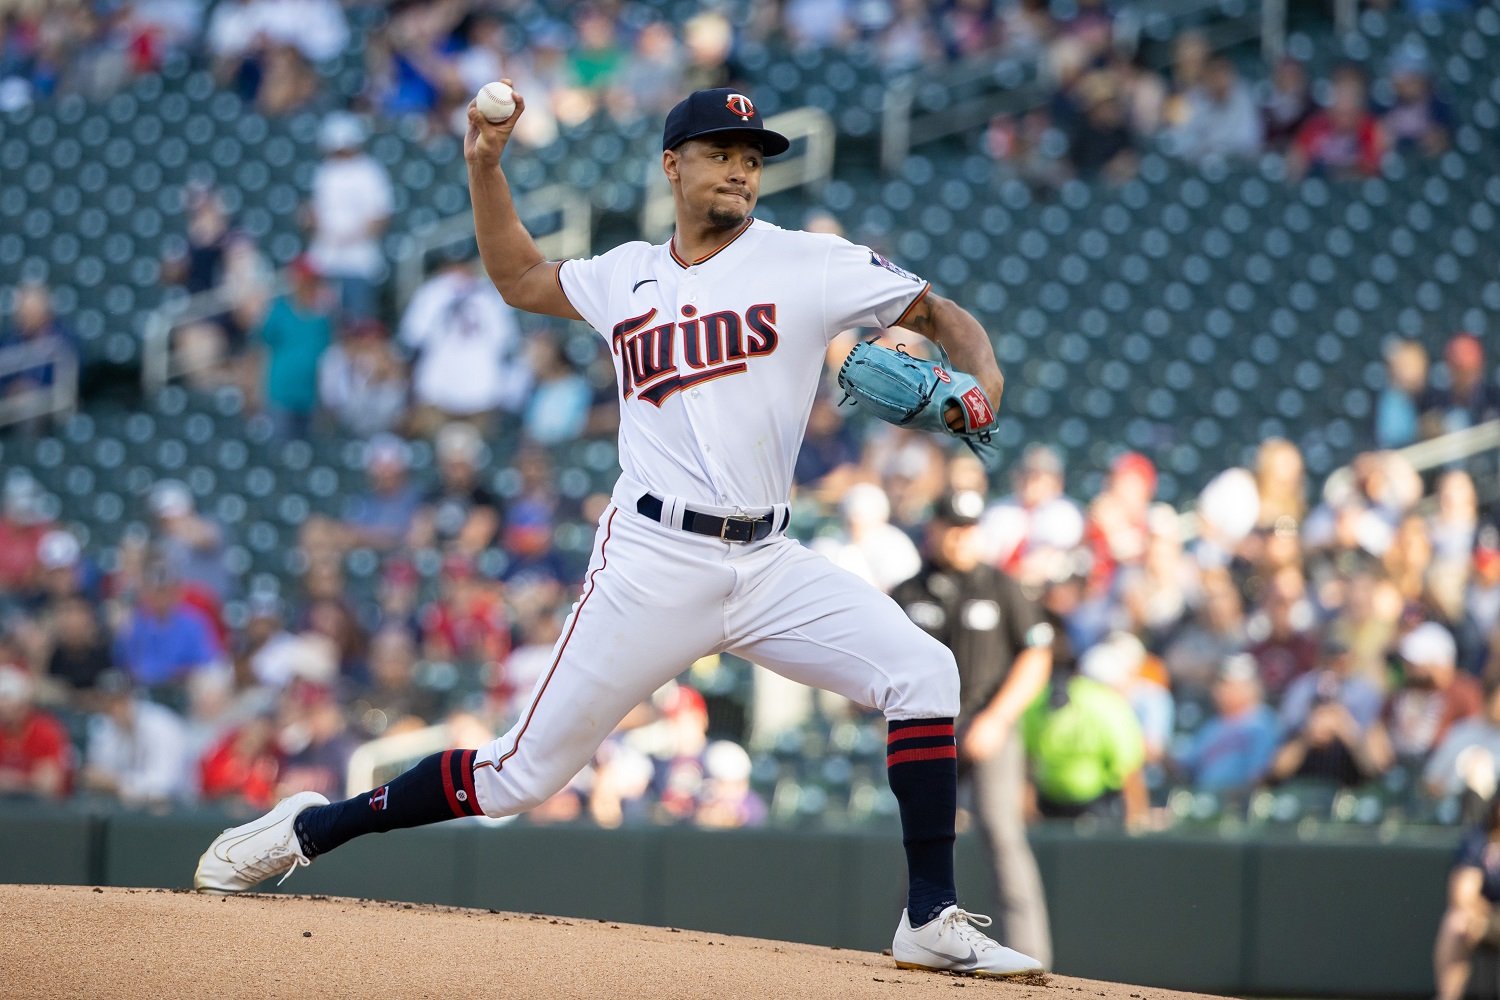 Twins add former Rays, Pirates pitcher Chris Archer to rotation